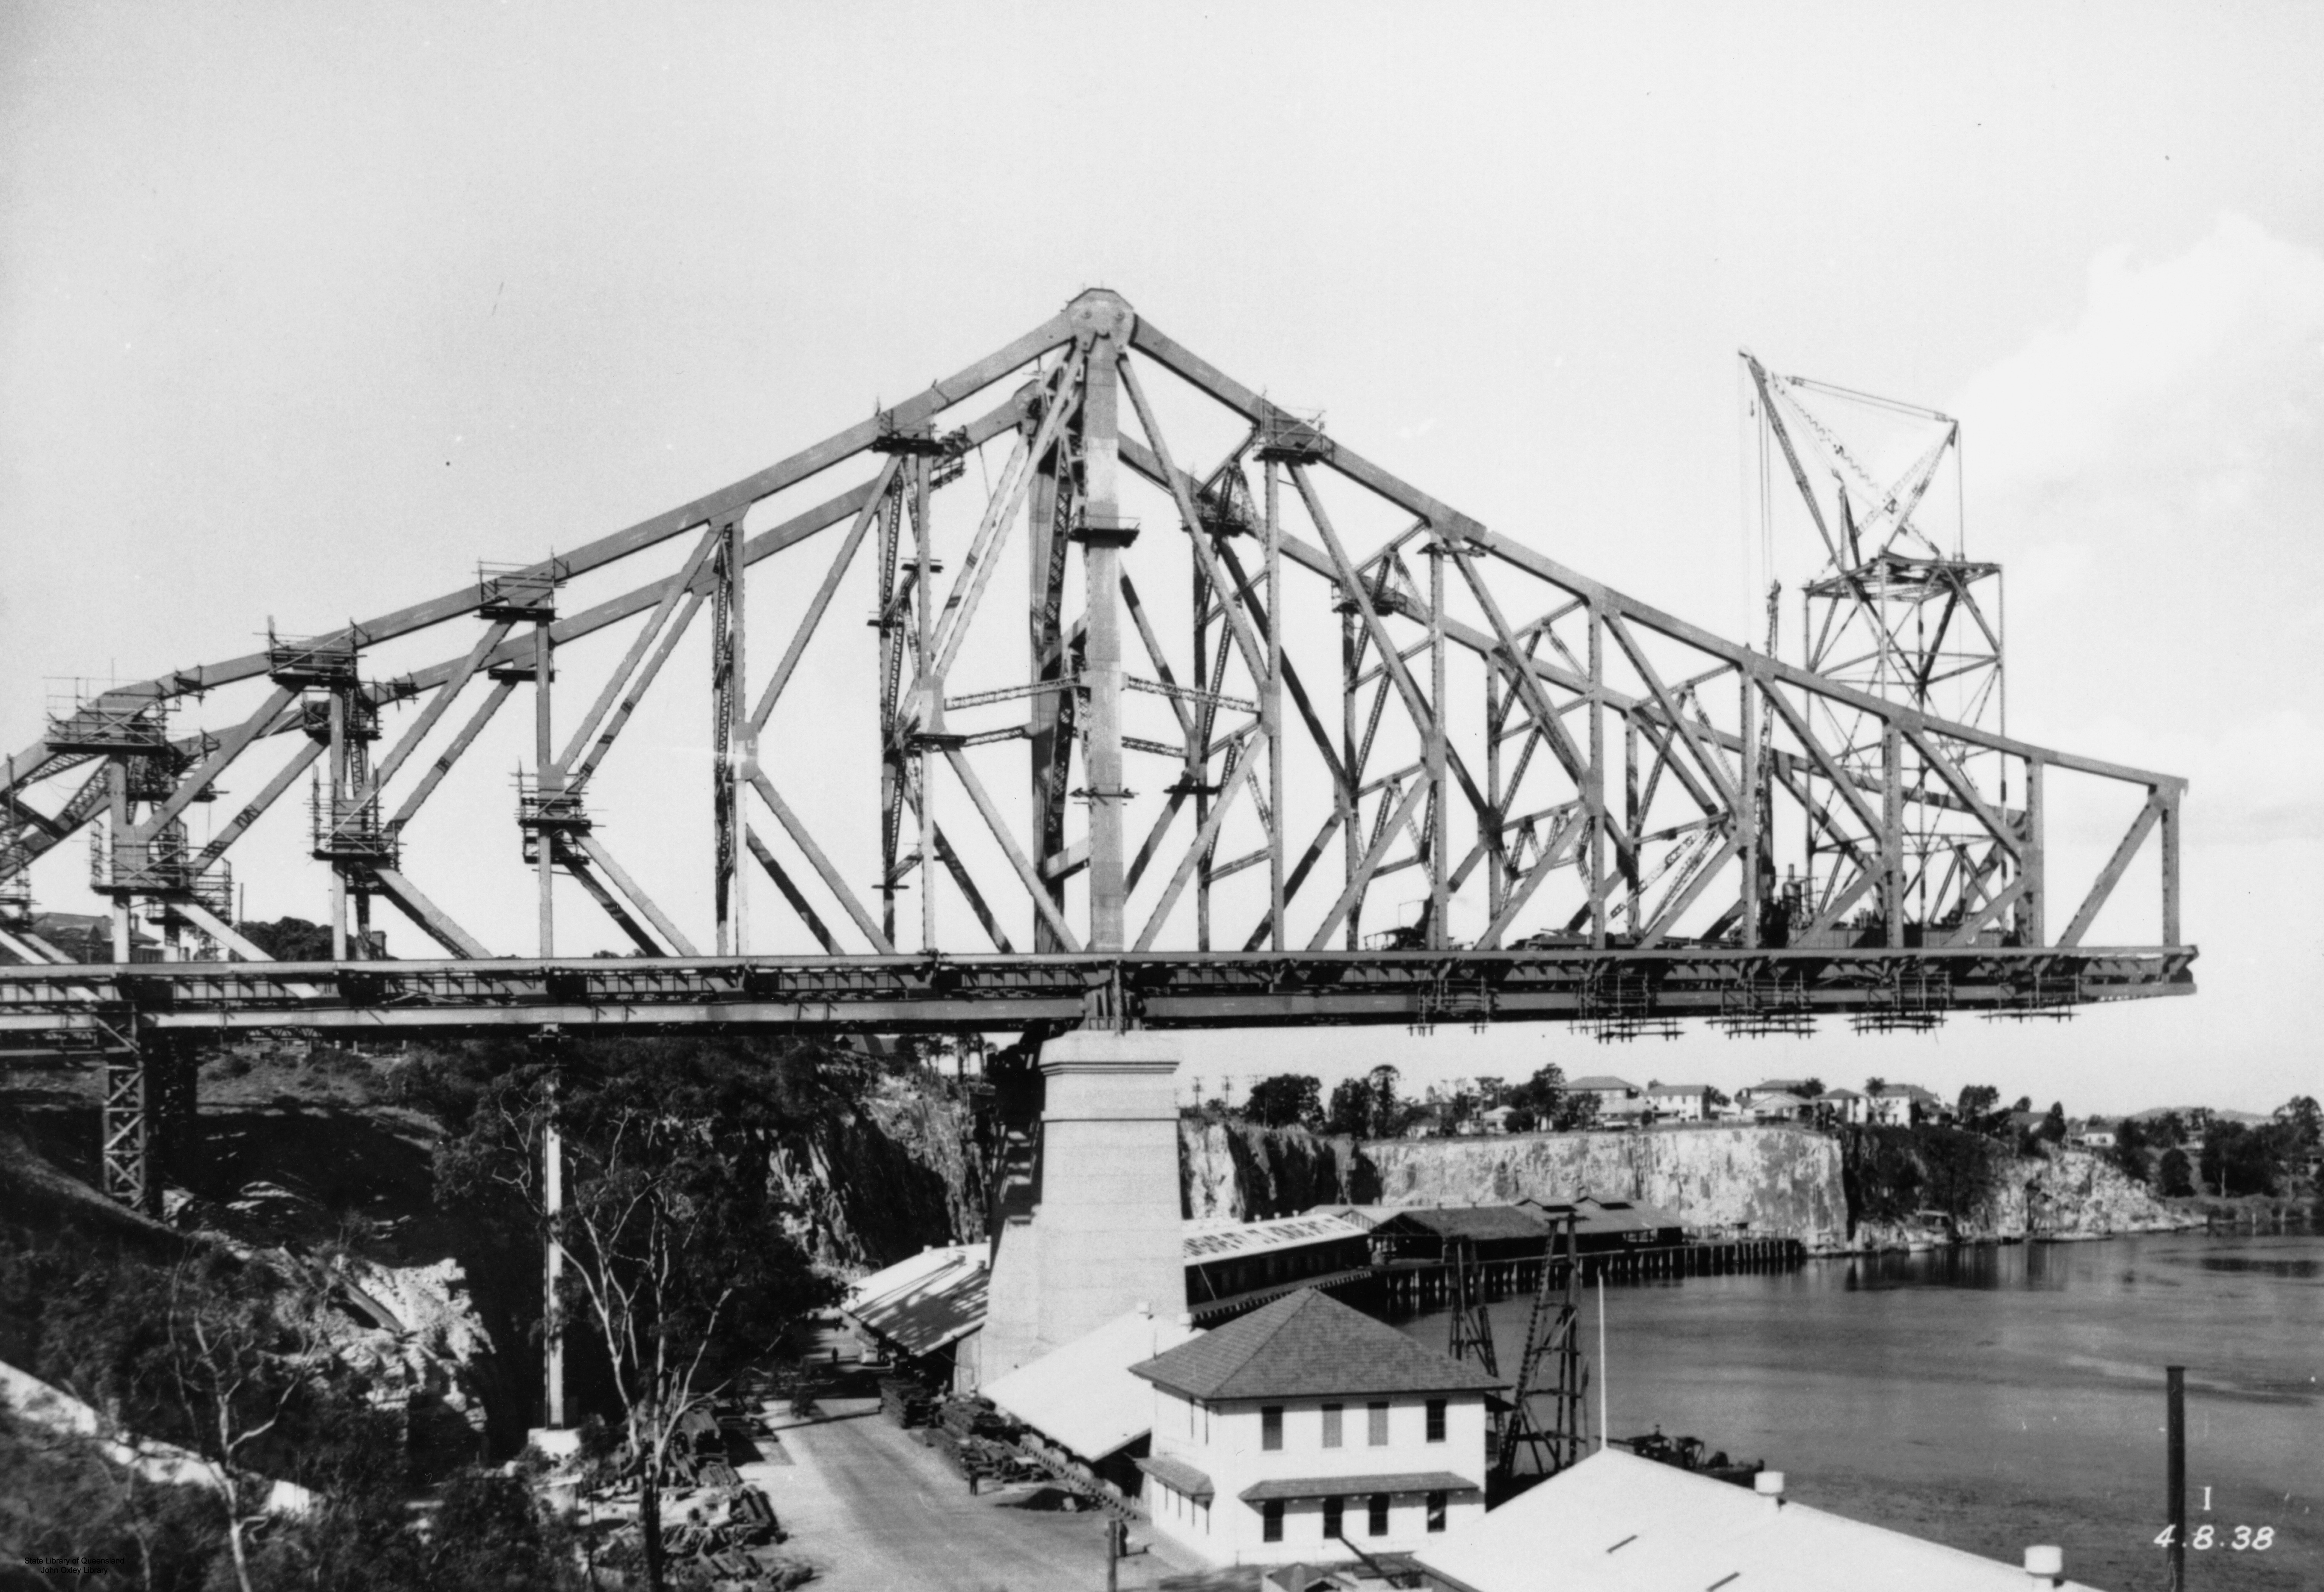 Black and white image from 1938 of the Brisbane Story Bridge under construction